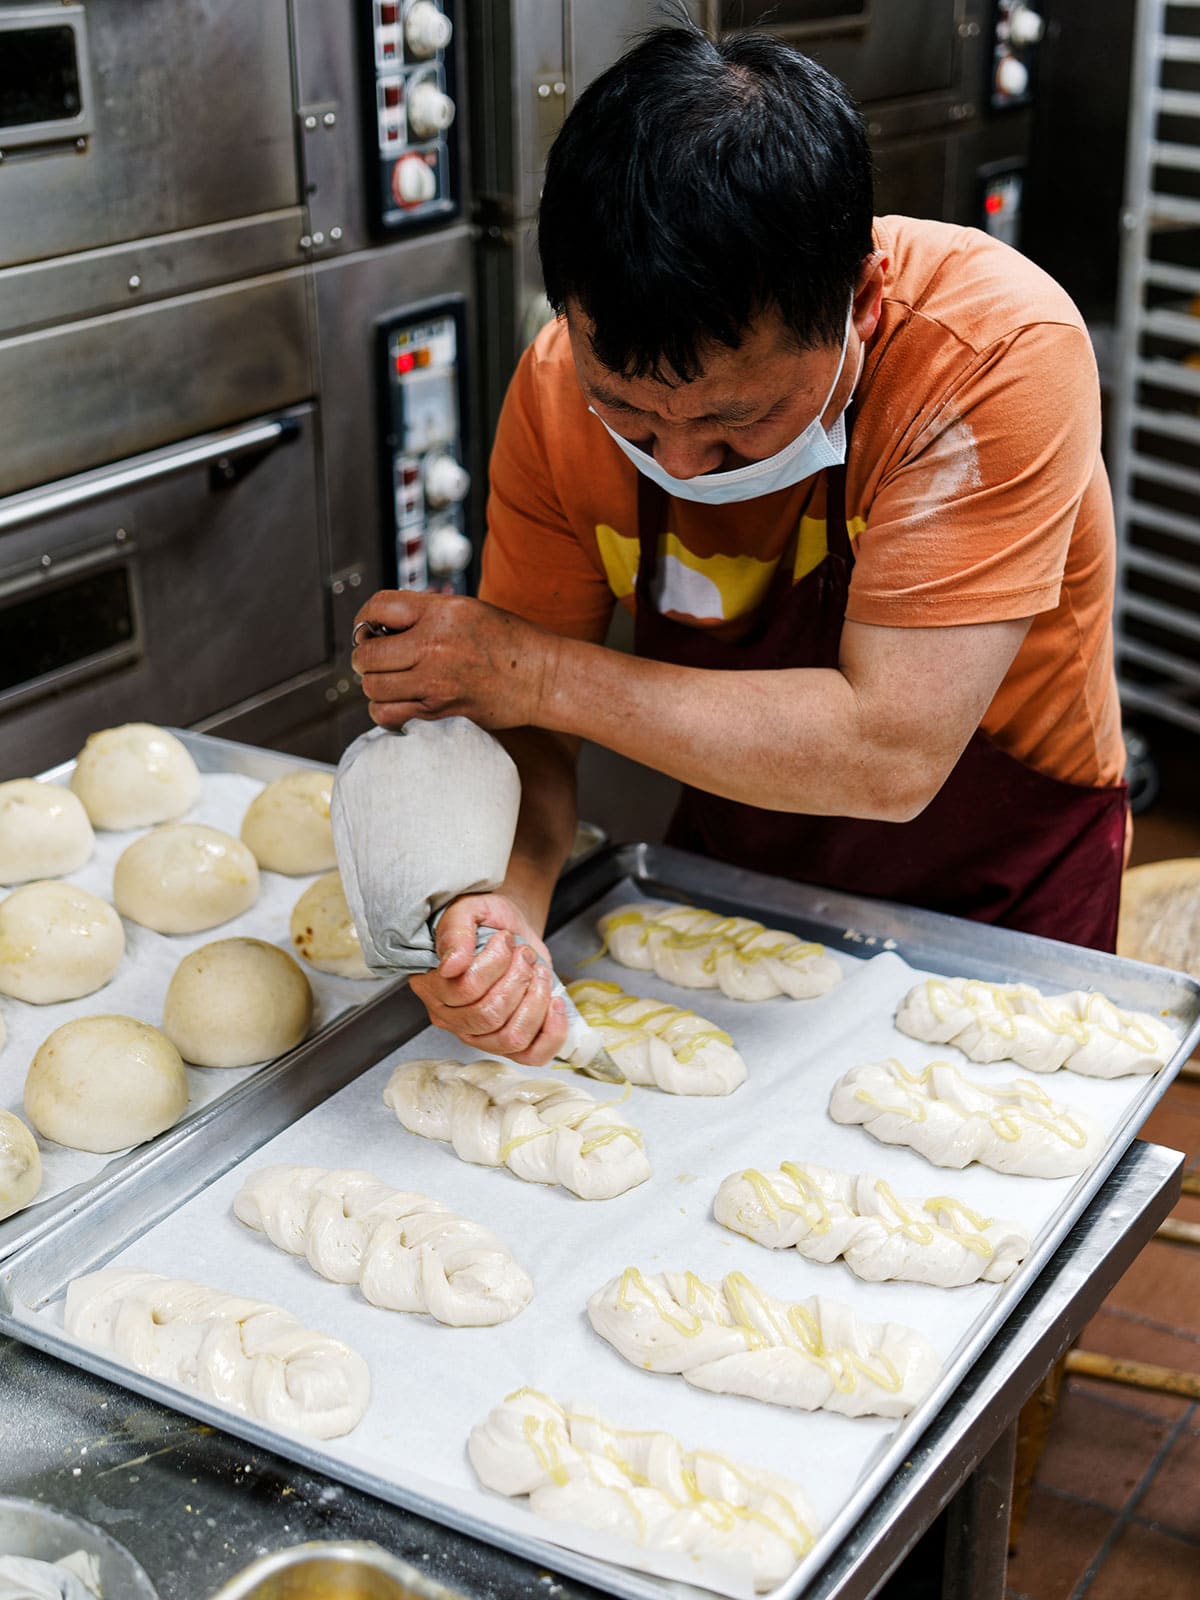 Baker piping a topping onto braided dough.